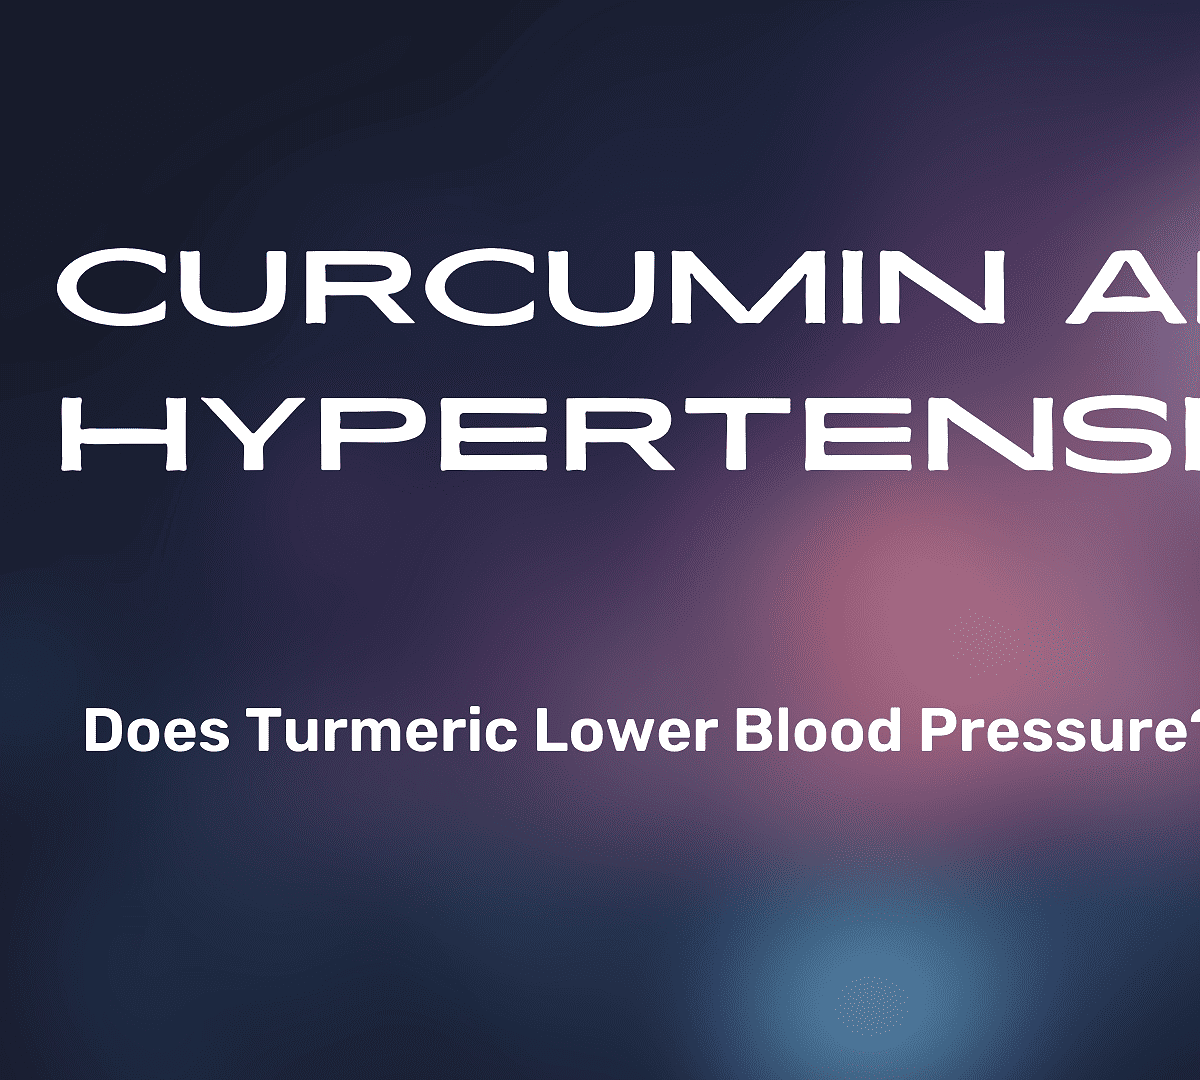 Curcumin and Hypertension -Does Turmeric Lower Blood Pressure?